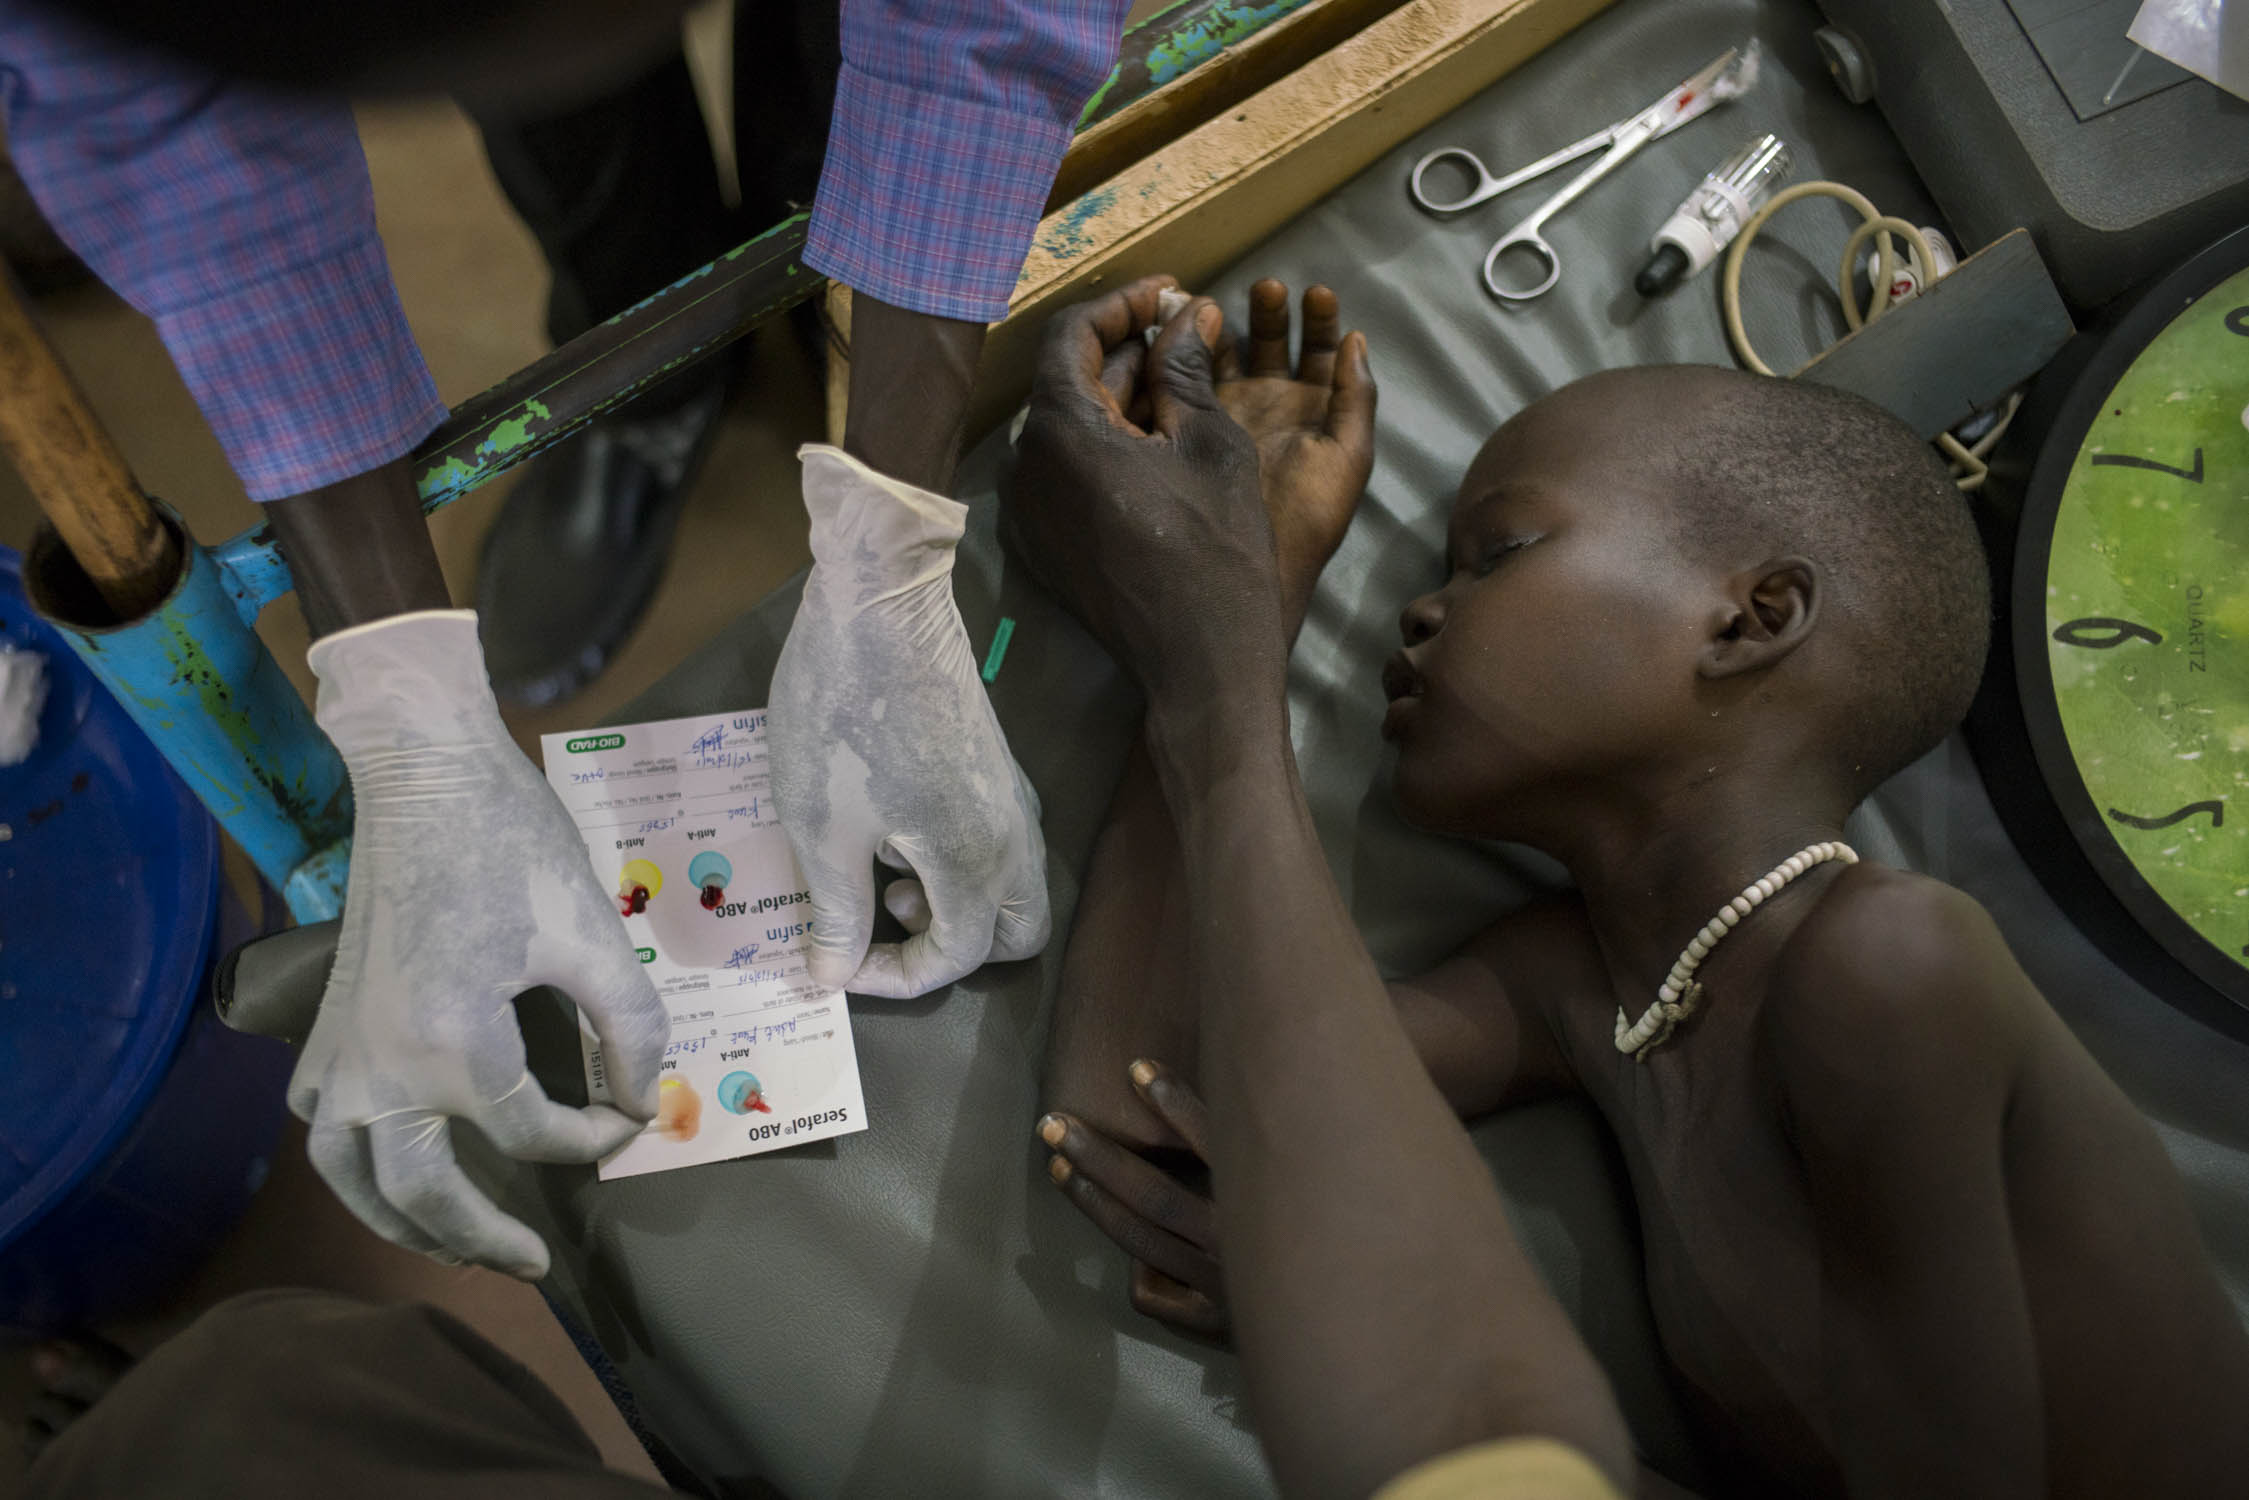  A nurse checks blood-type compatibility before administering a blood transfusion to Adut Chuor Kujal, 8, who is receiving treatment for cerebral malaria at an MSF hospital in Aweil city, South Sudan. Adut's father presses down on her fingertip that 